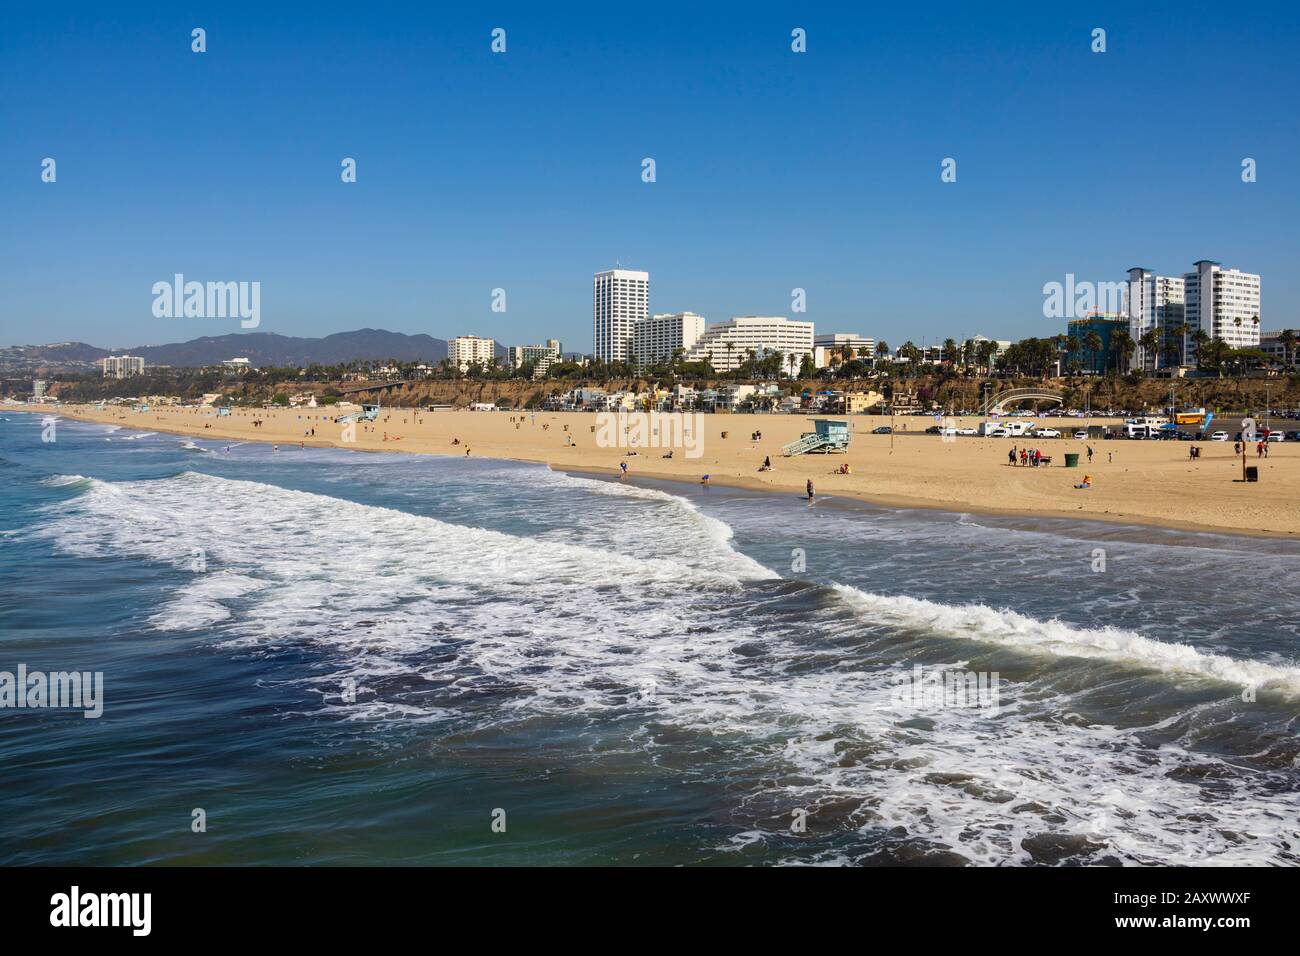 Santa Monica beach with downtown and hotels. California, United States of America. USA. October 2019 Stock Photo